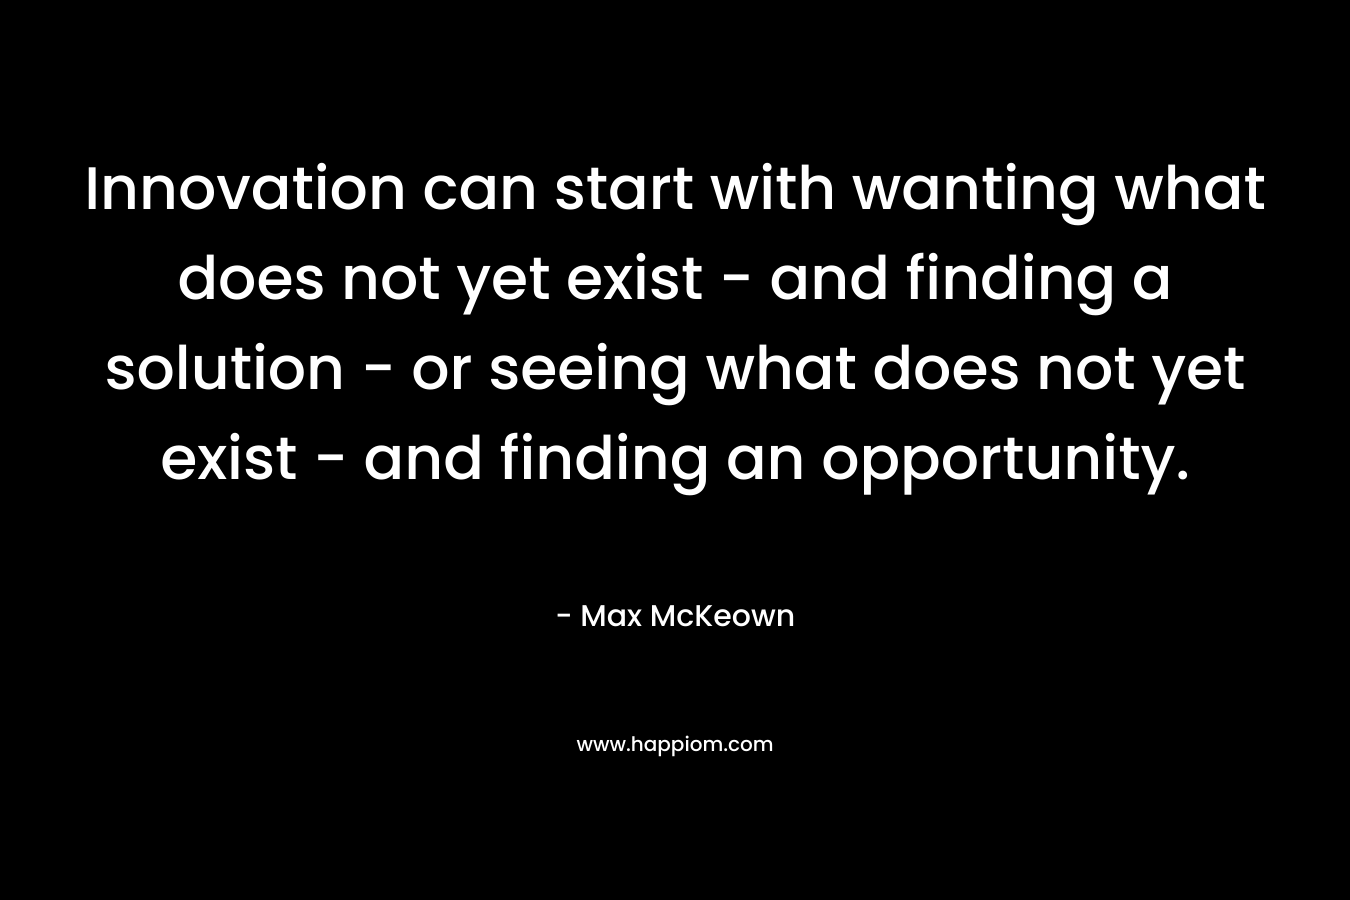 Innovation can start with wanting what does not yet exist - and finding a solution - or seeing what does not yet exist - and finding an opportunity.